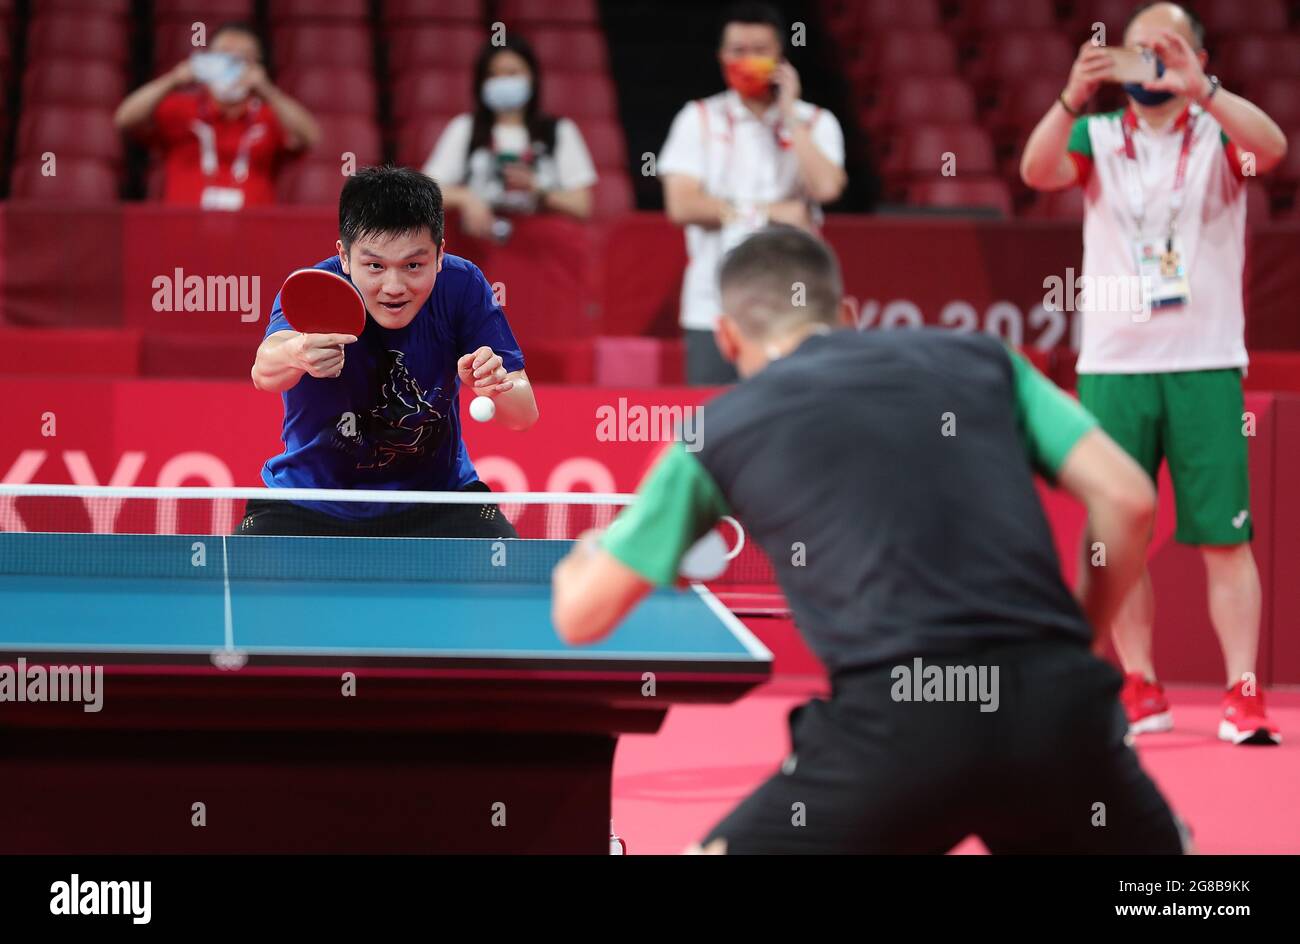 Tokyo, Japan. 19th July, 2021. Chinese table tennis player Fan Zhendong (L)  attends a training session ahead of the Tokyo 2020 Olympic Games in Tokyo,  Japan, July 19, 2021. Credit: Wang Dongzhen/Xinhua/Alamy